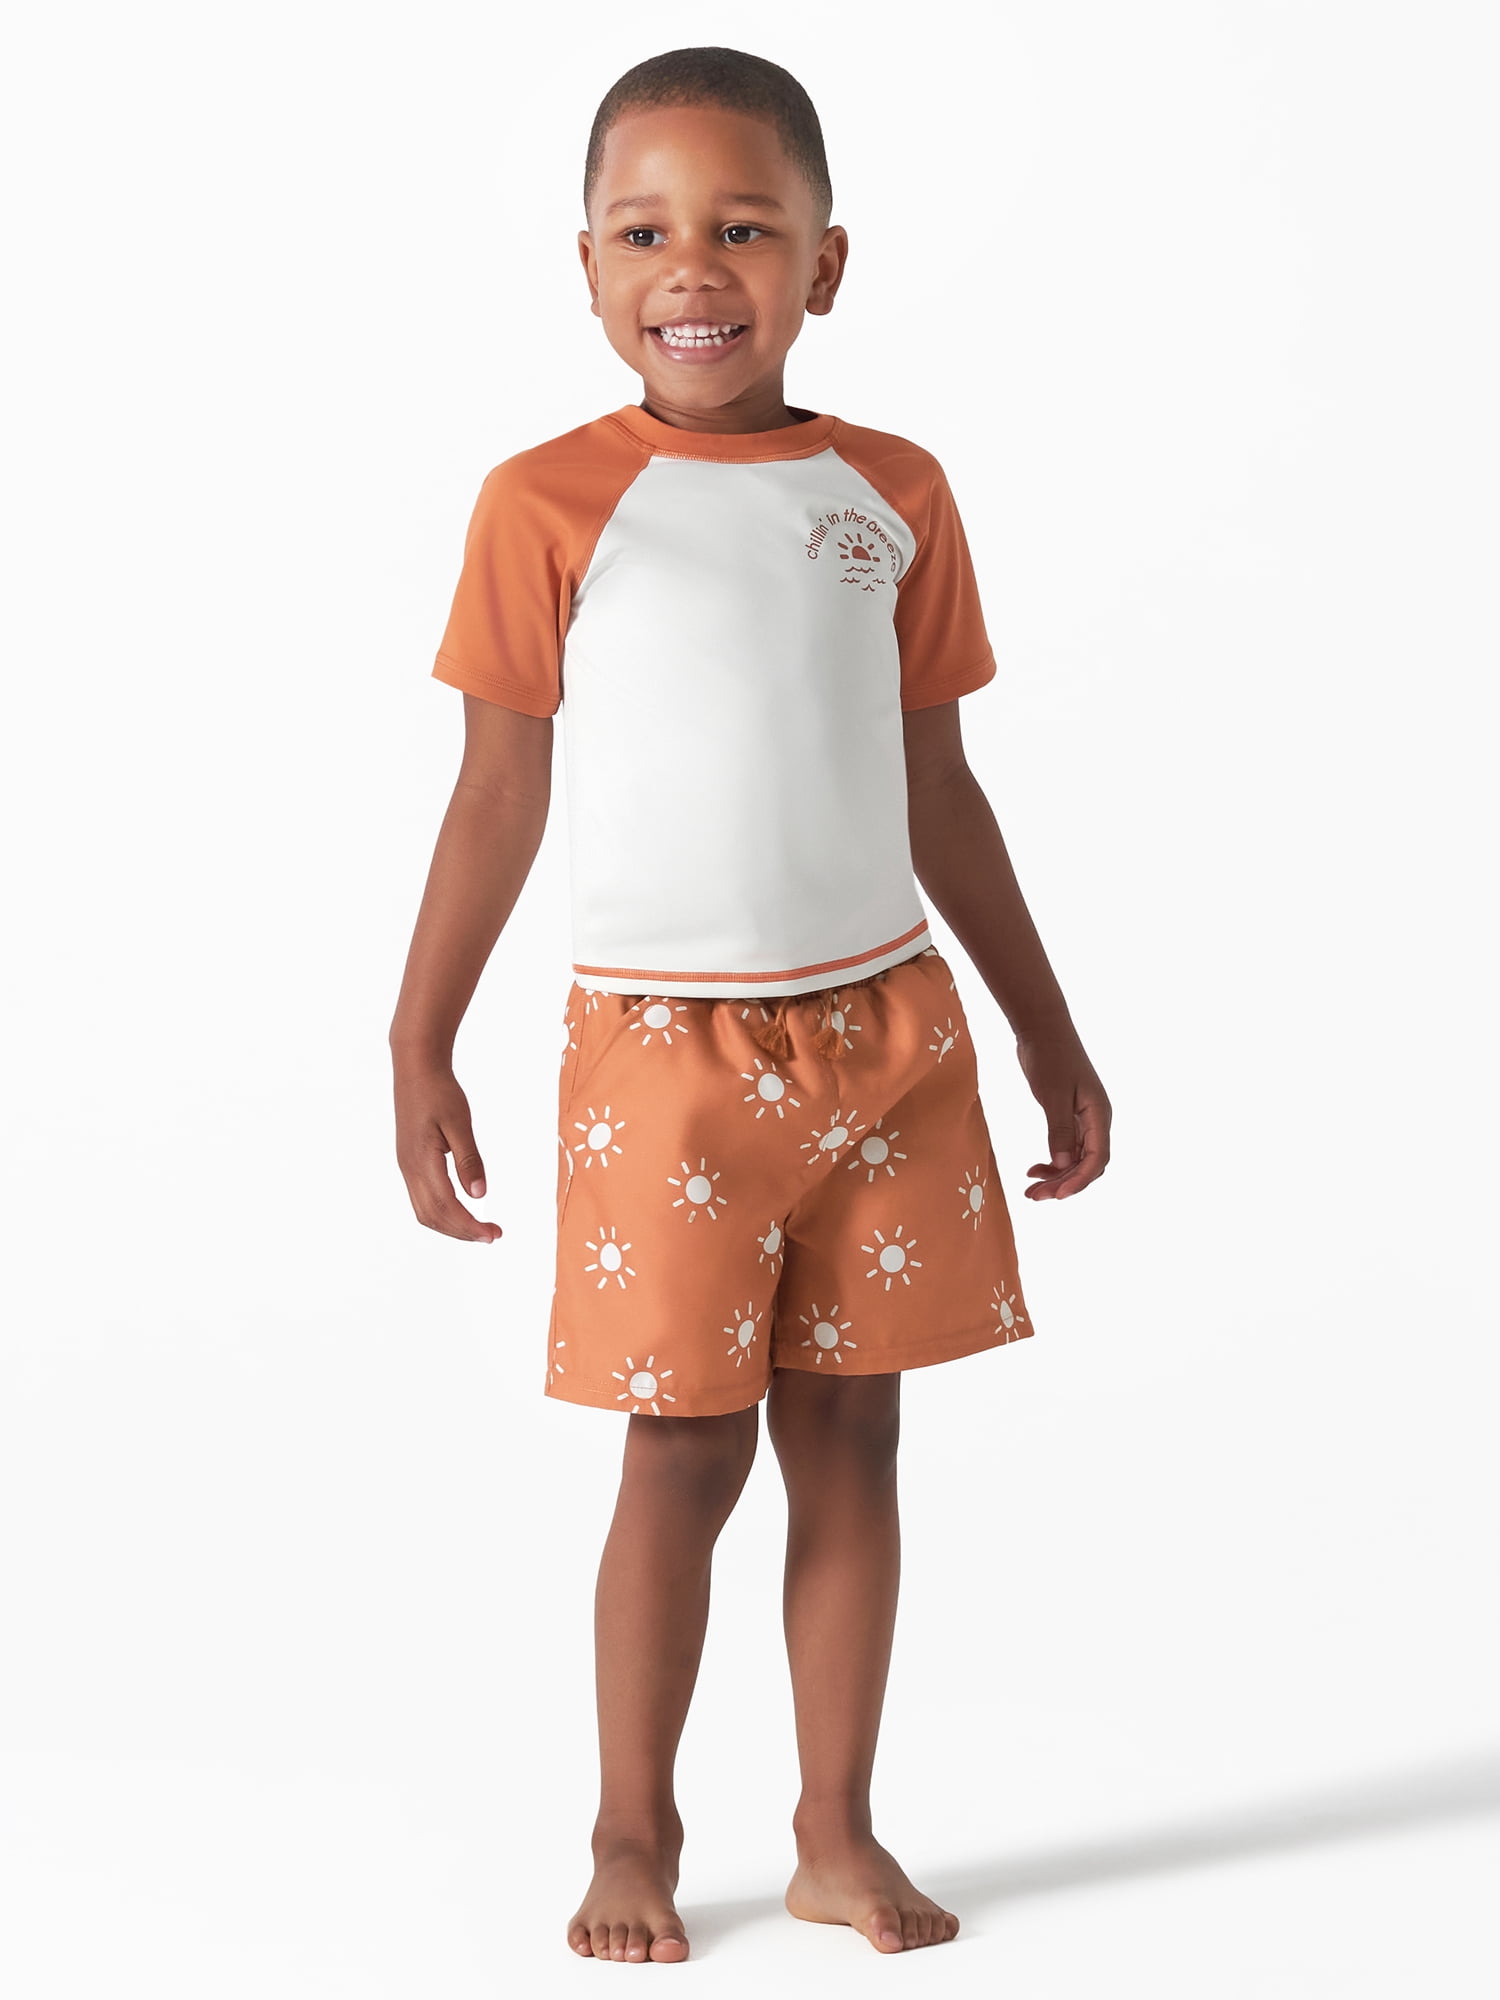 Modern Moments by Gerber Baby and Toddler Boys Short Sleeve Rash Guard and Swim Trunks Set with UPF 50+, 2-Piece, Sizes 12M-5T